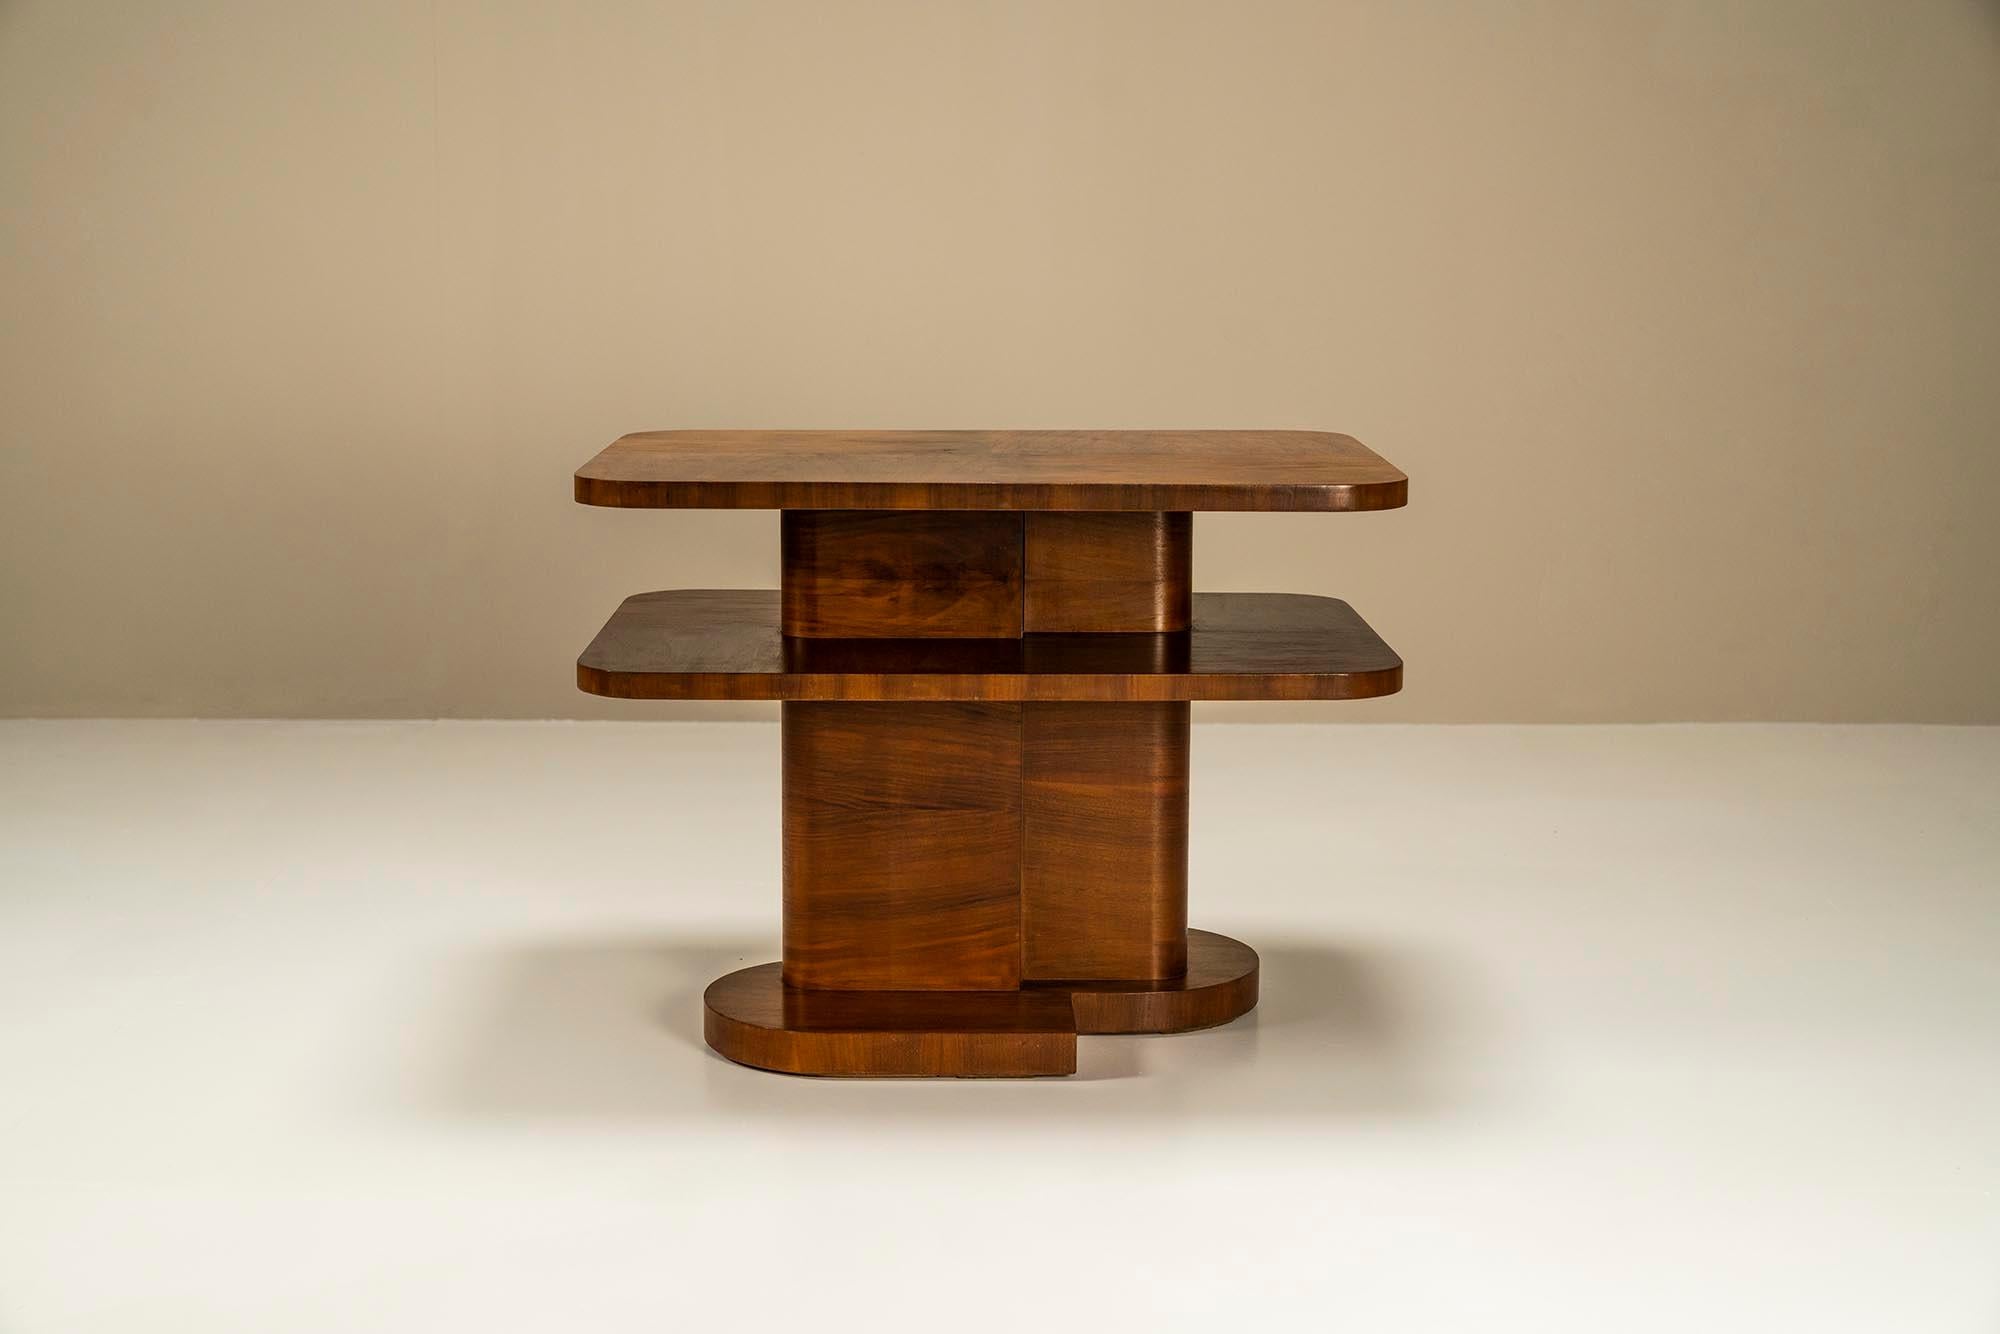 Dutch Art Deco Modern-Style Side Table in Mahogany by ‘t Woonhuys, Netherlands, 1930s